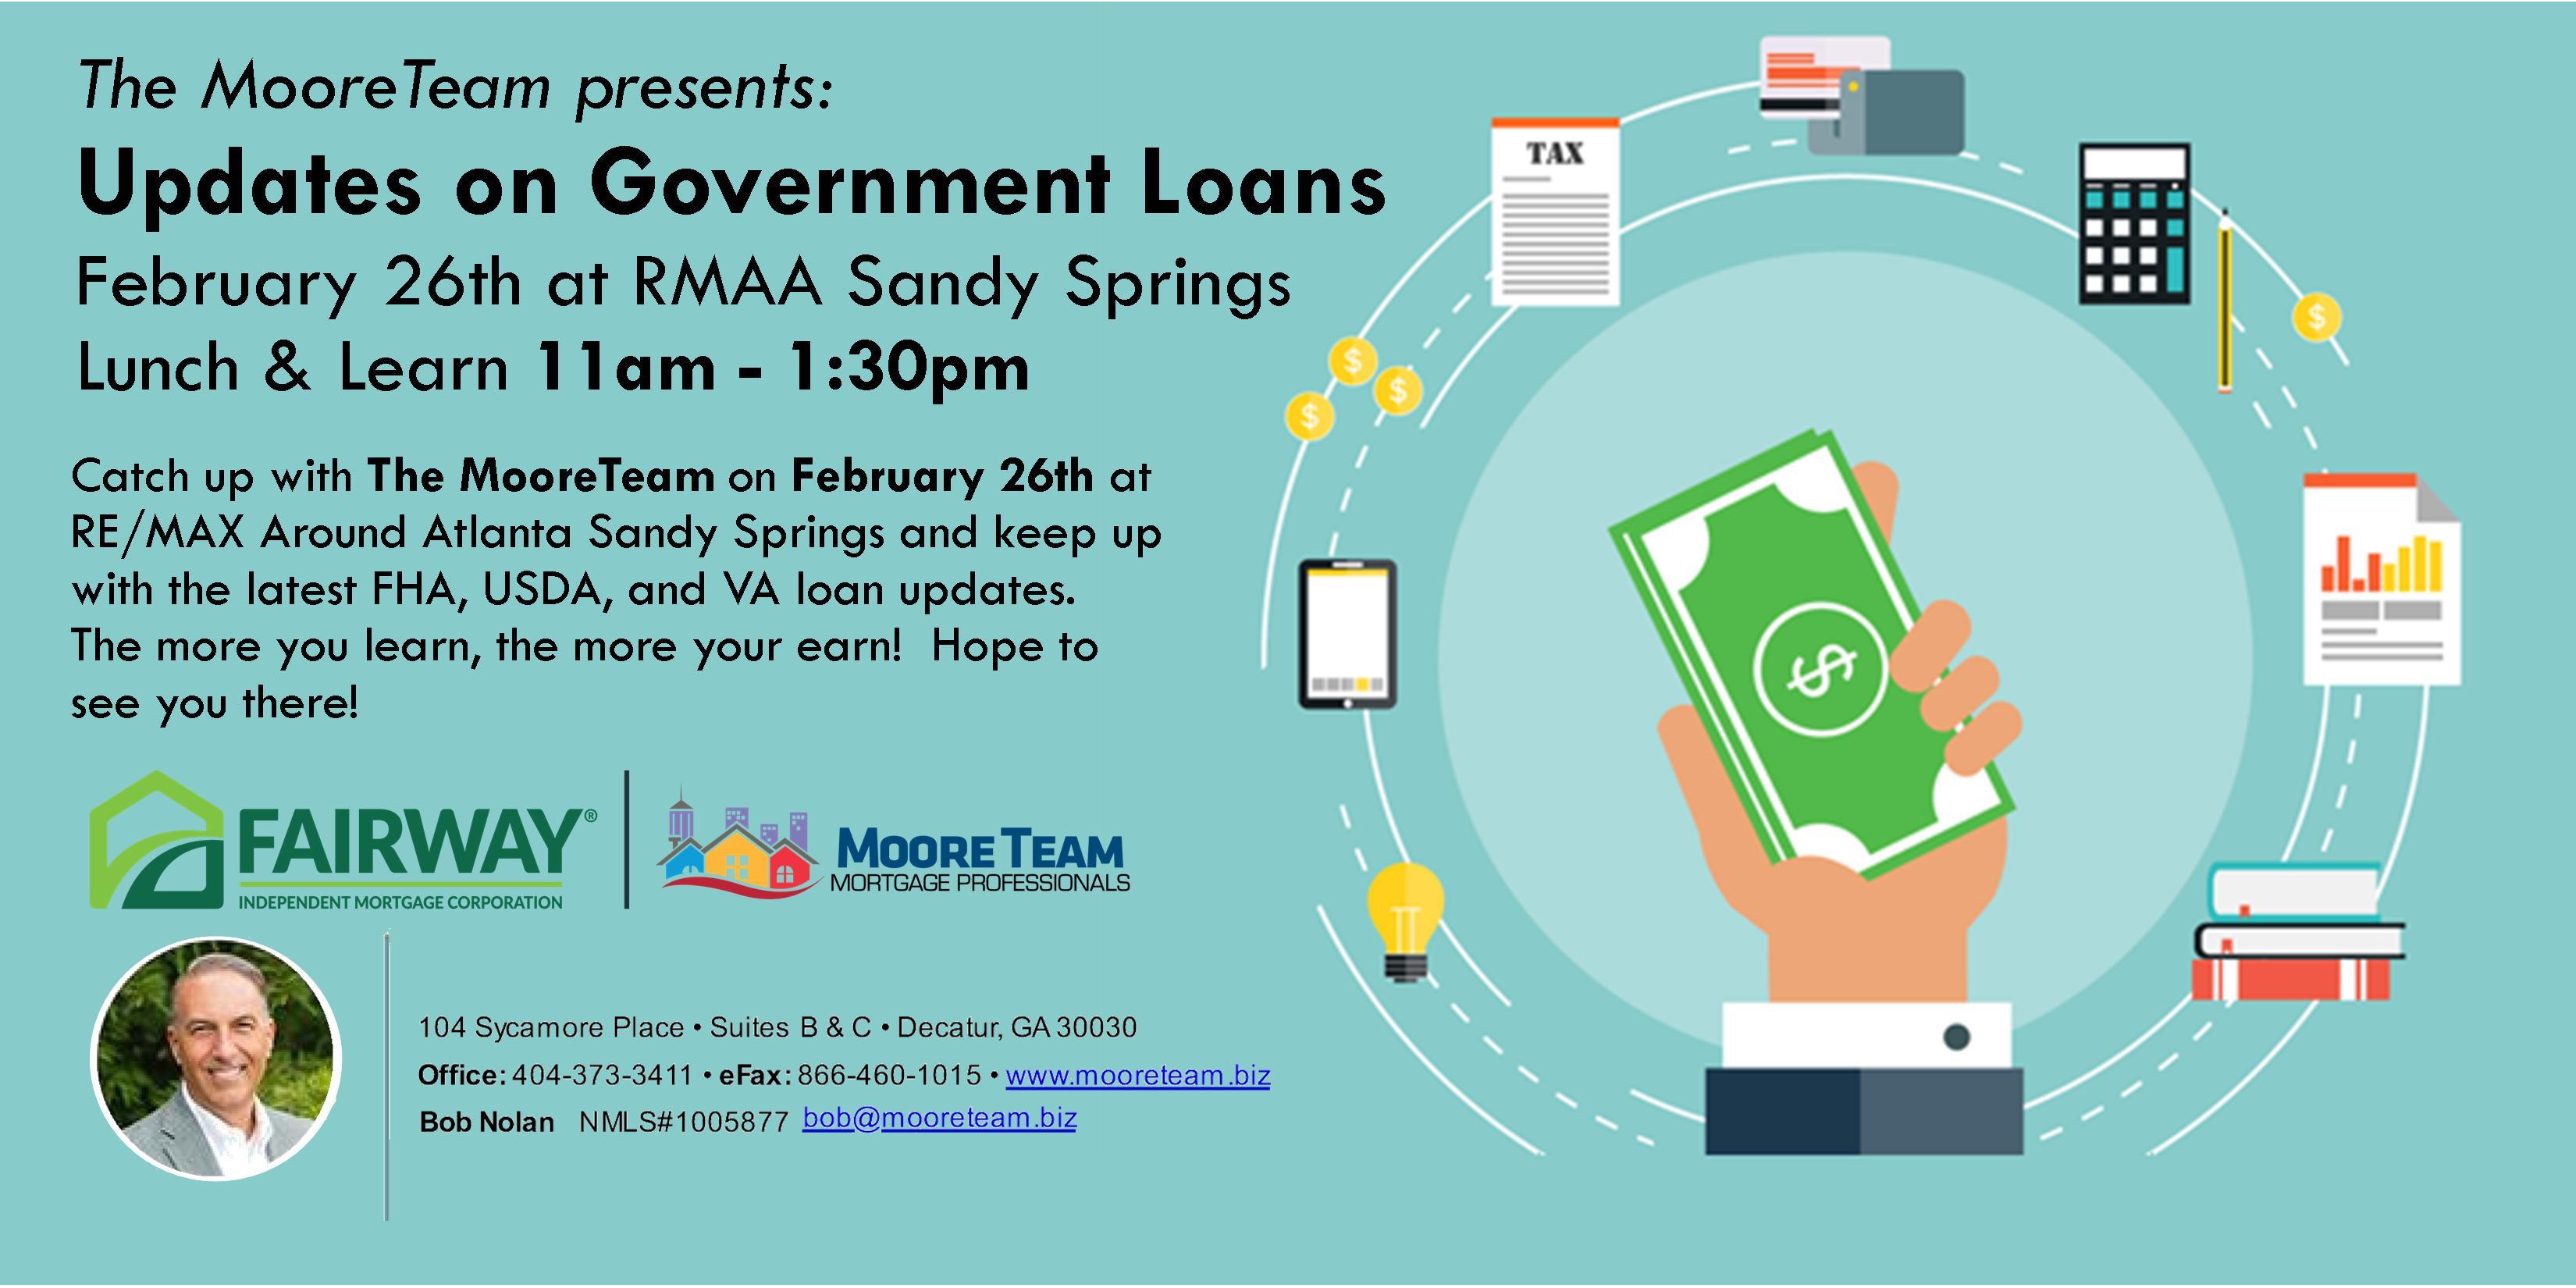 Lunch & Learn - Updates on Government Loan Programs - Presented by Mark Moore & Jay Nauta of the MooreTeam